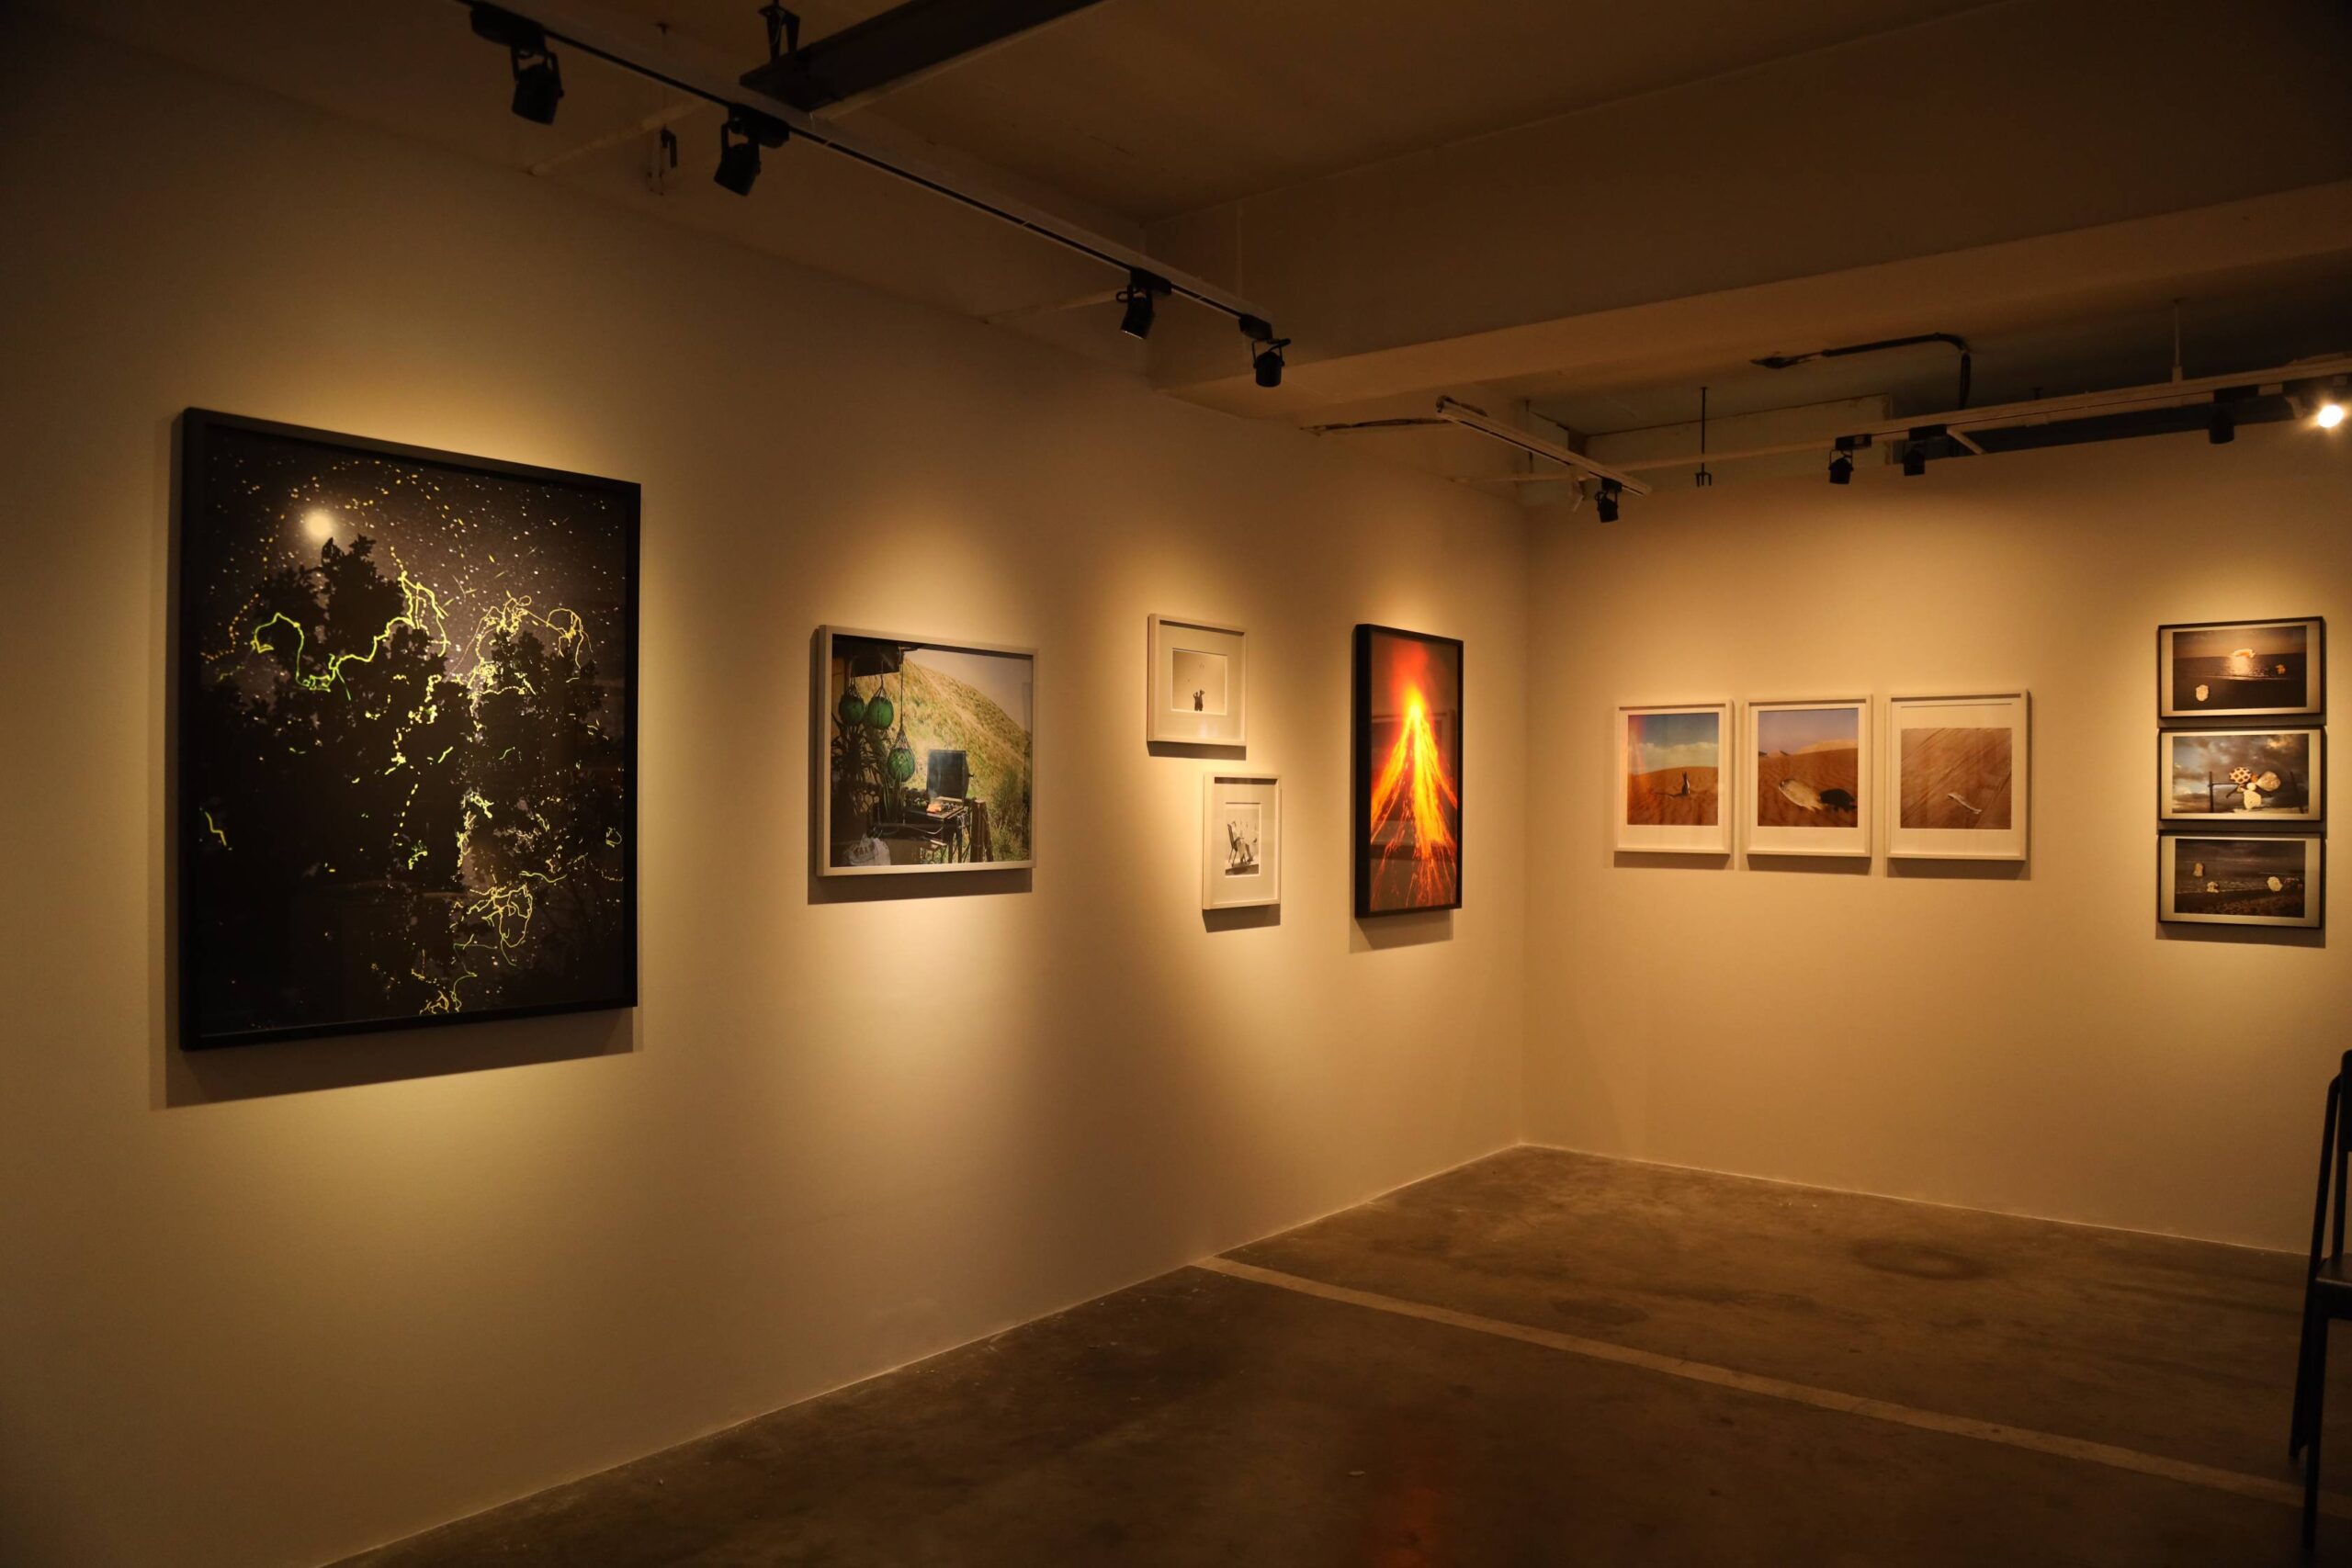 Paintings from the Tarzeer Pictures exhibit, contemporary arts in the Philippines.